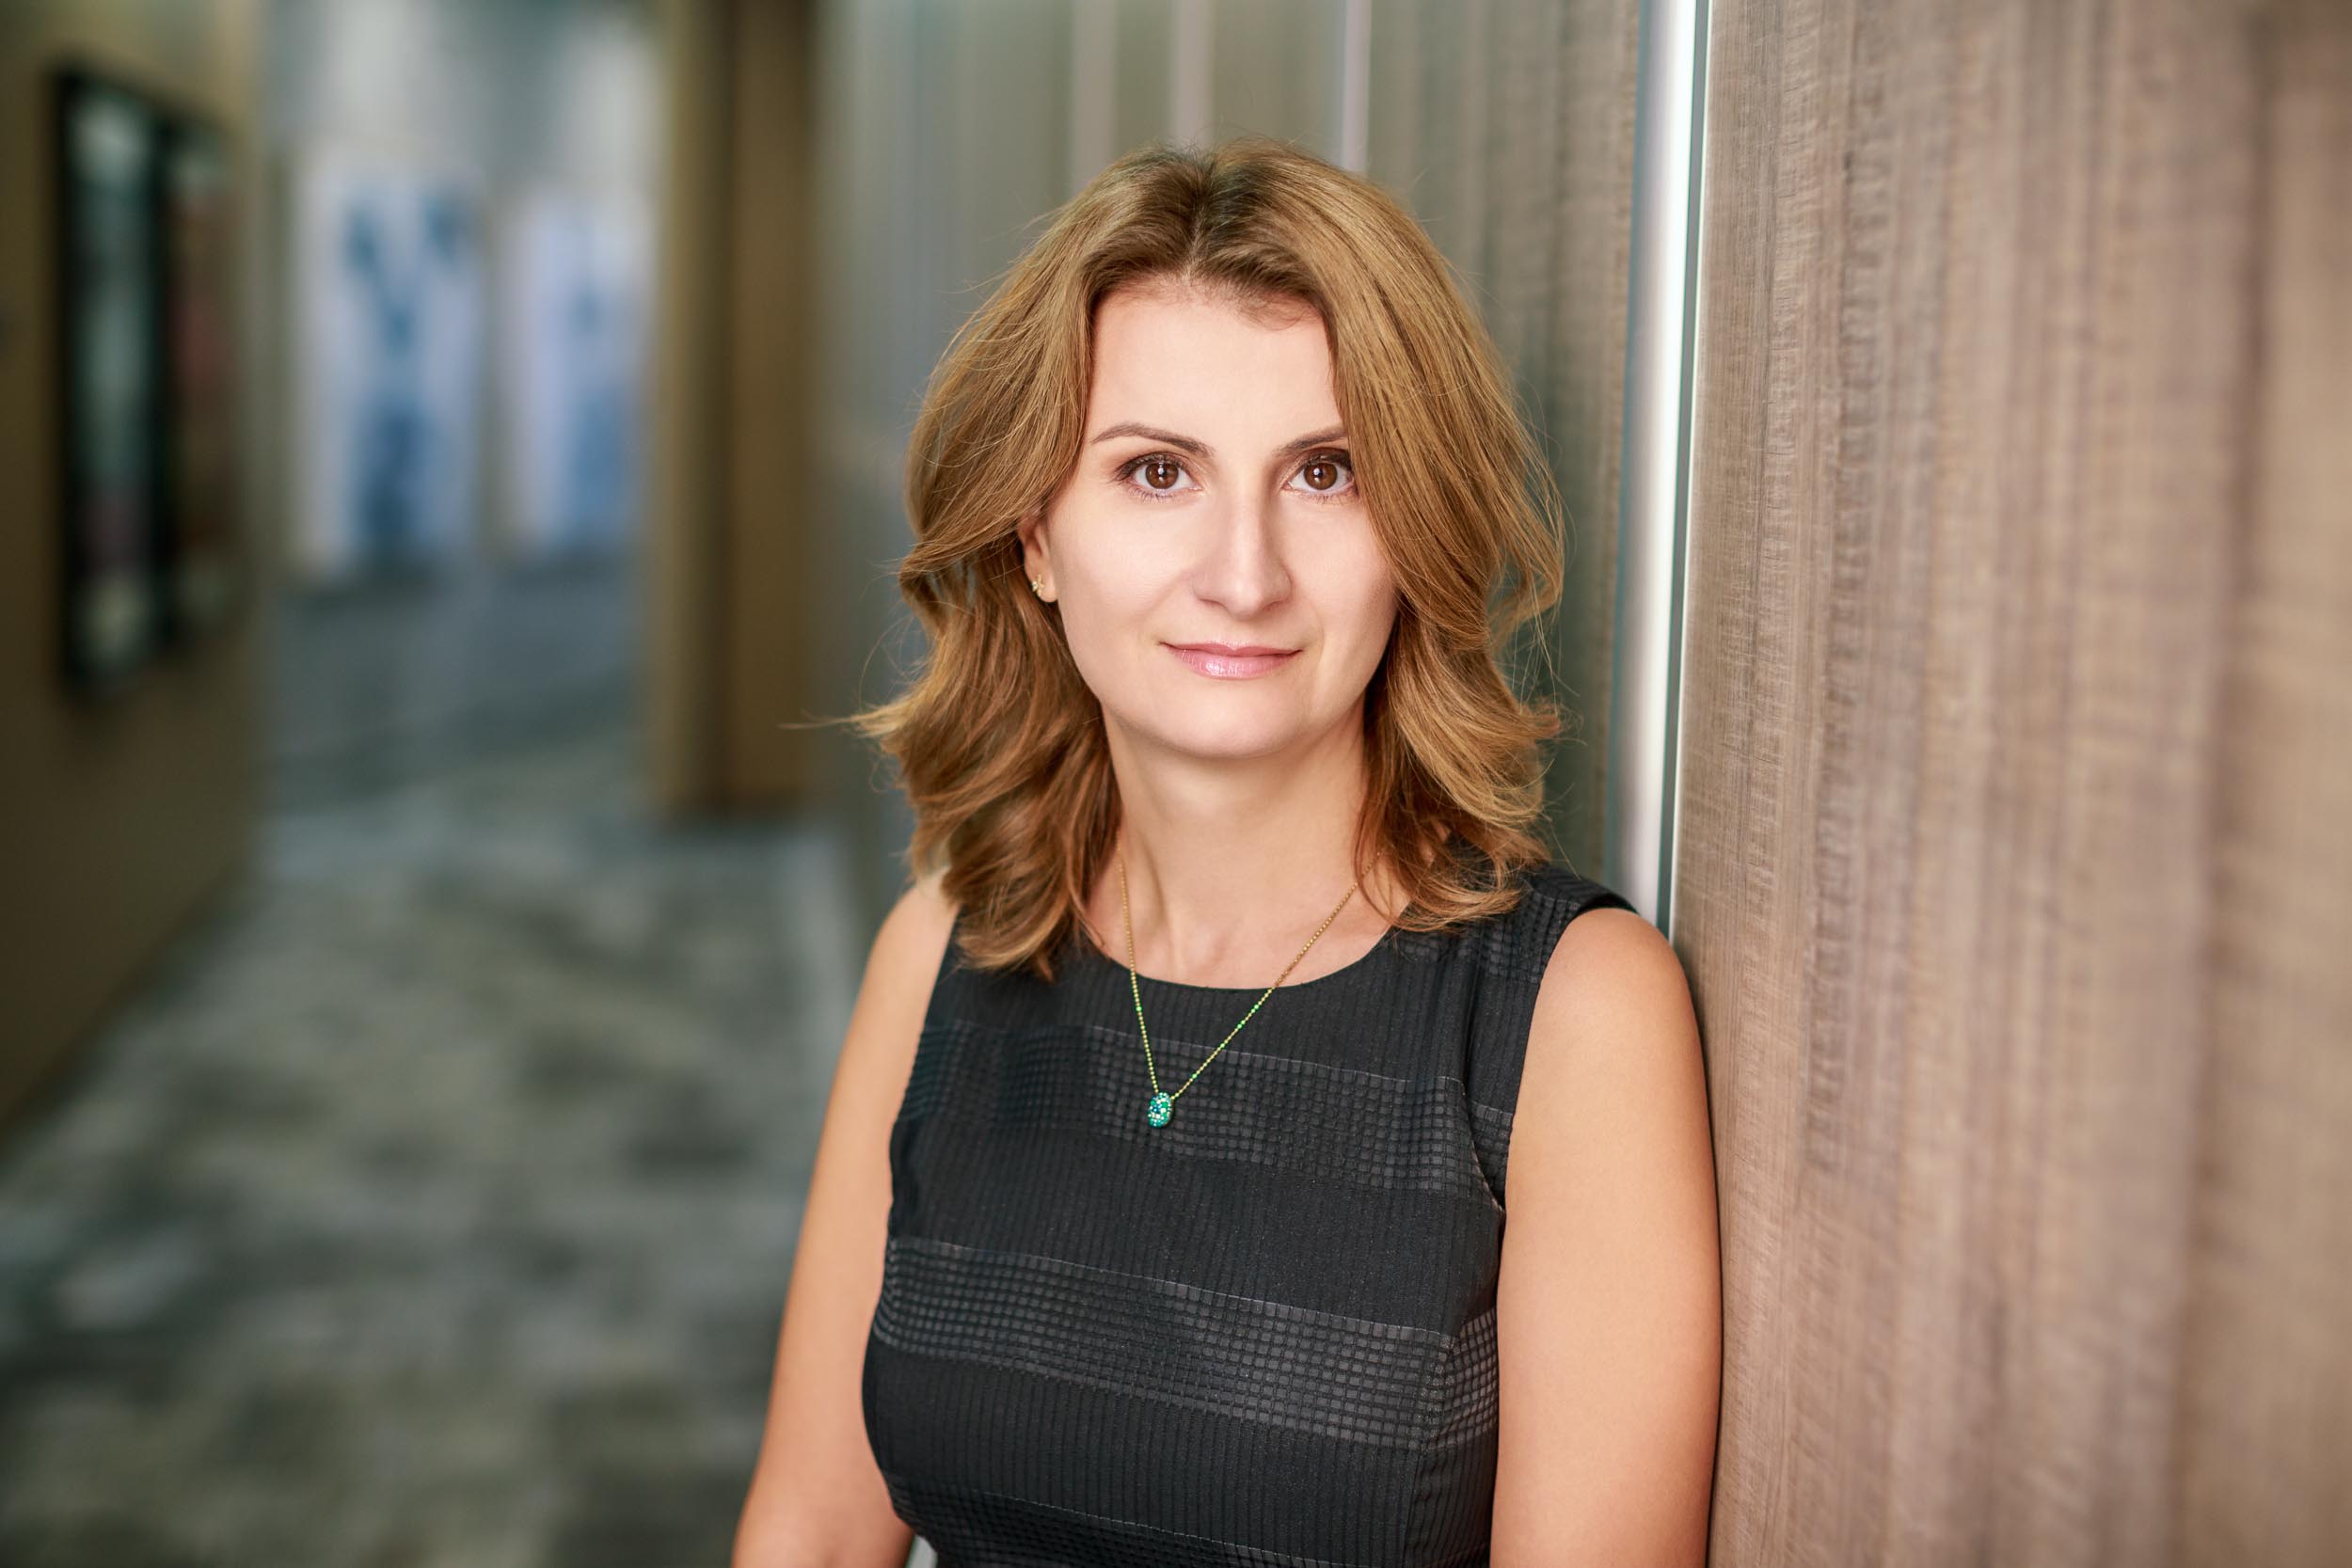 Globalworth appoints Ema Iftimie as Managing Director for its operations in Romania